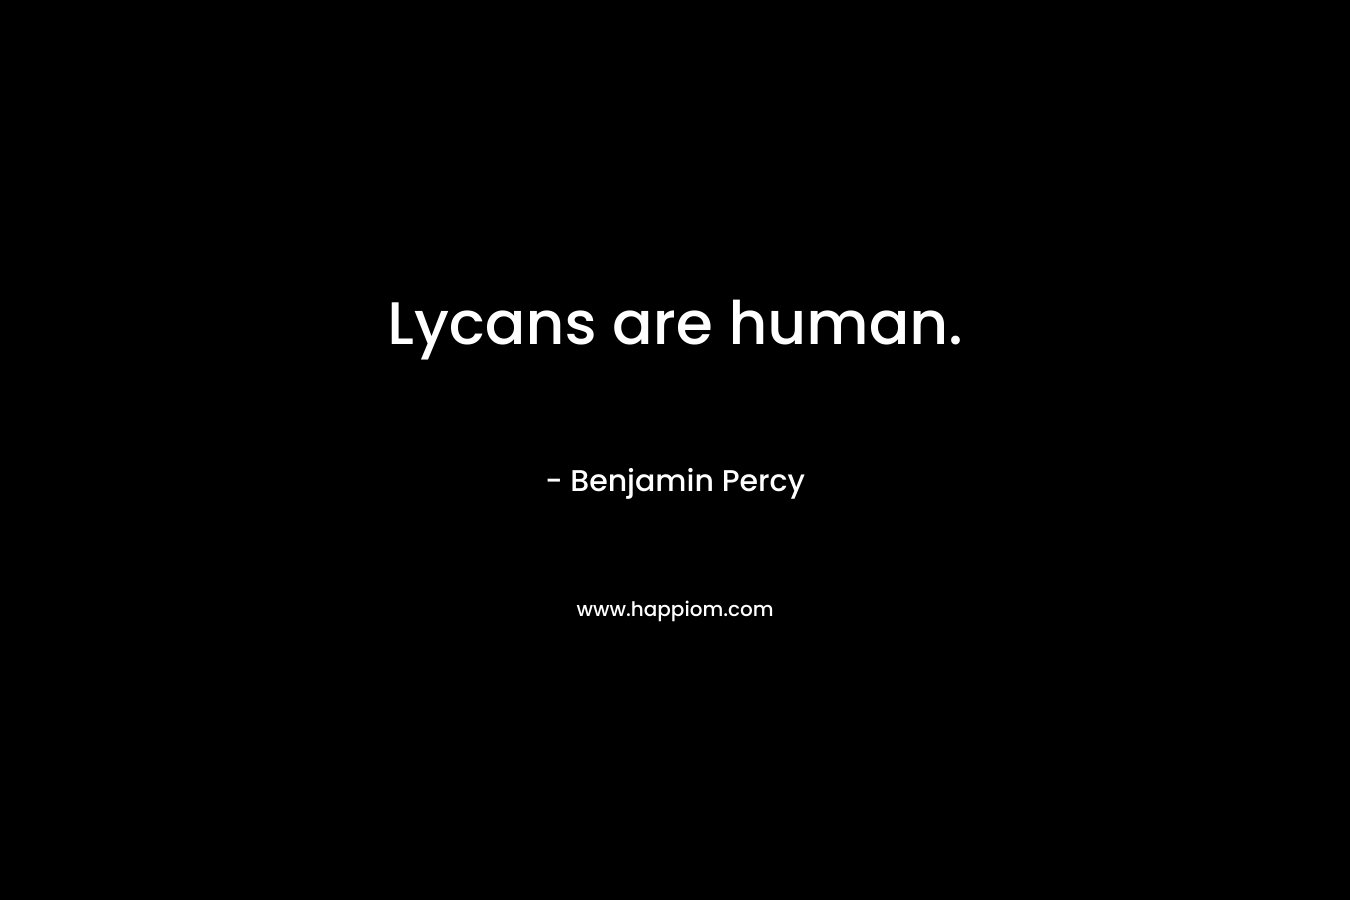 Lycans are human. – Benjamin Percy